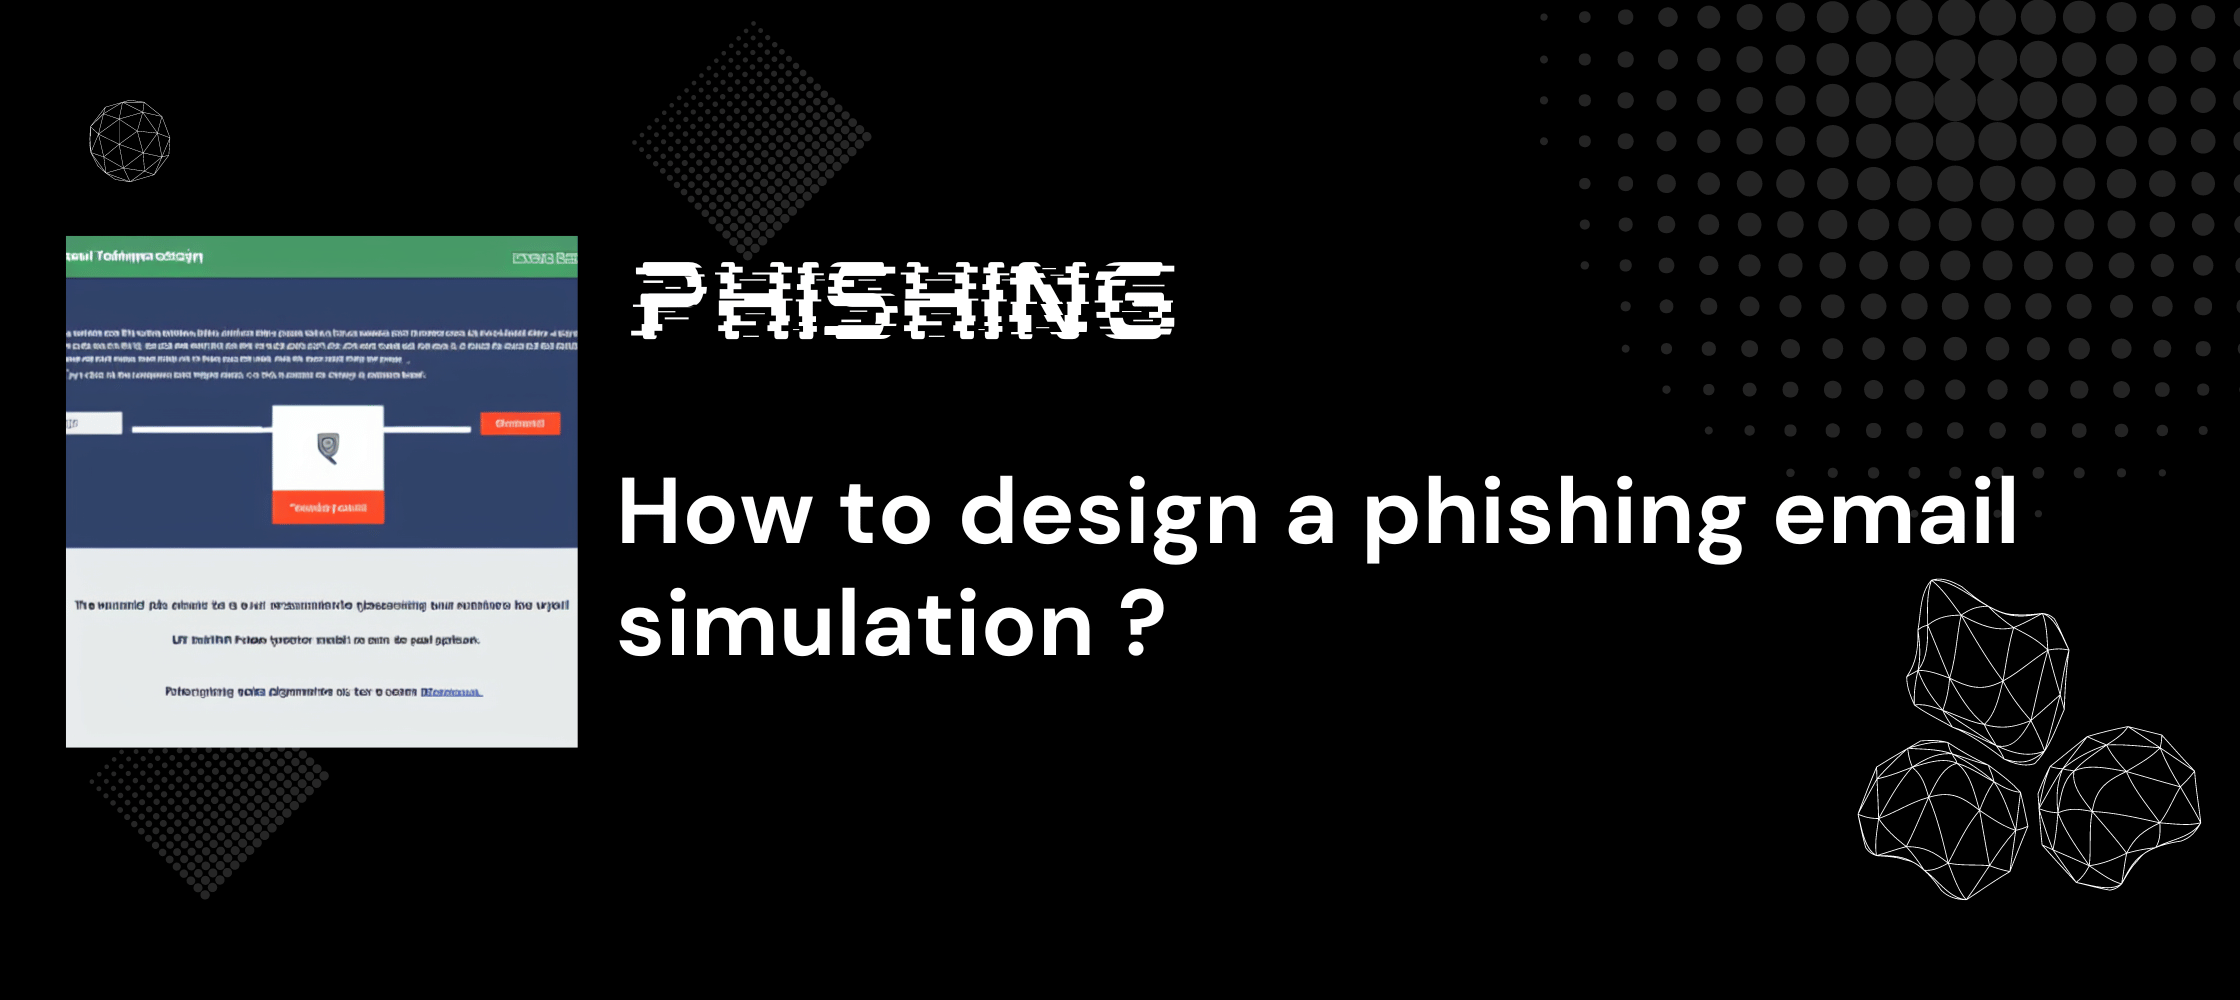 How to design a phishing email simulation campaign?